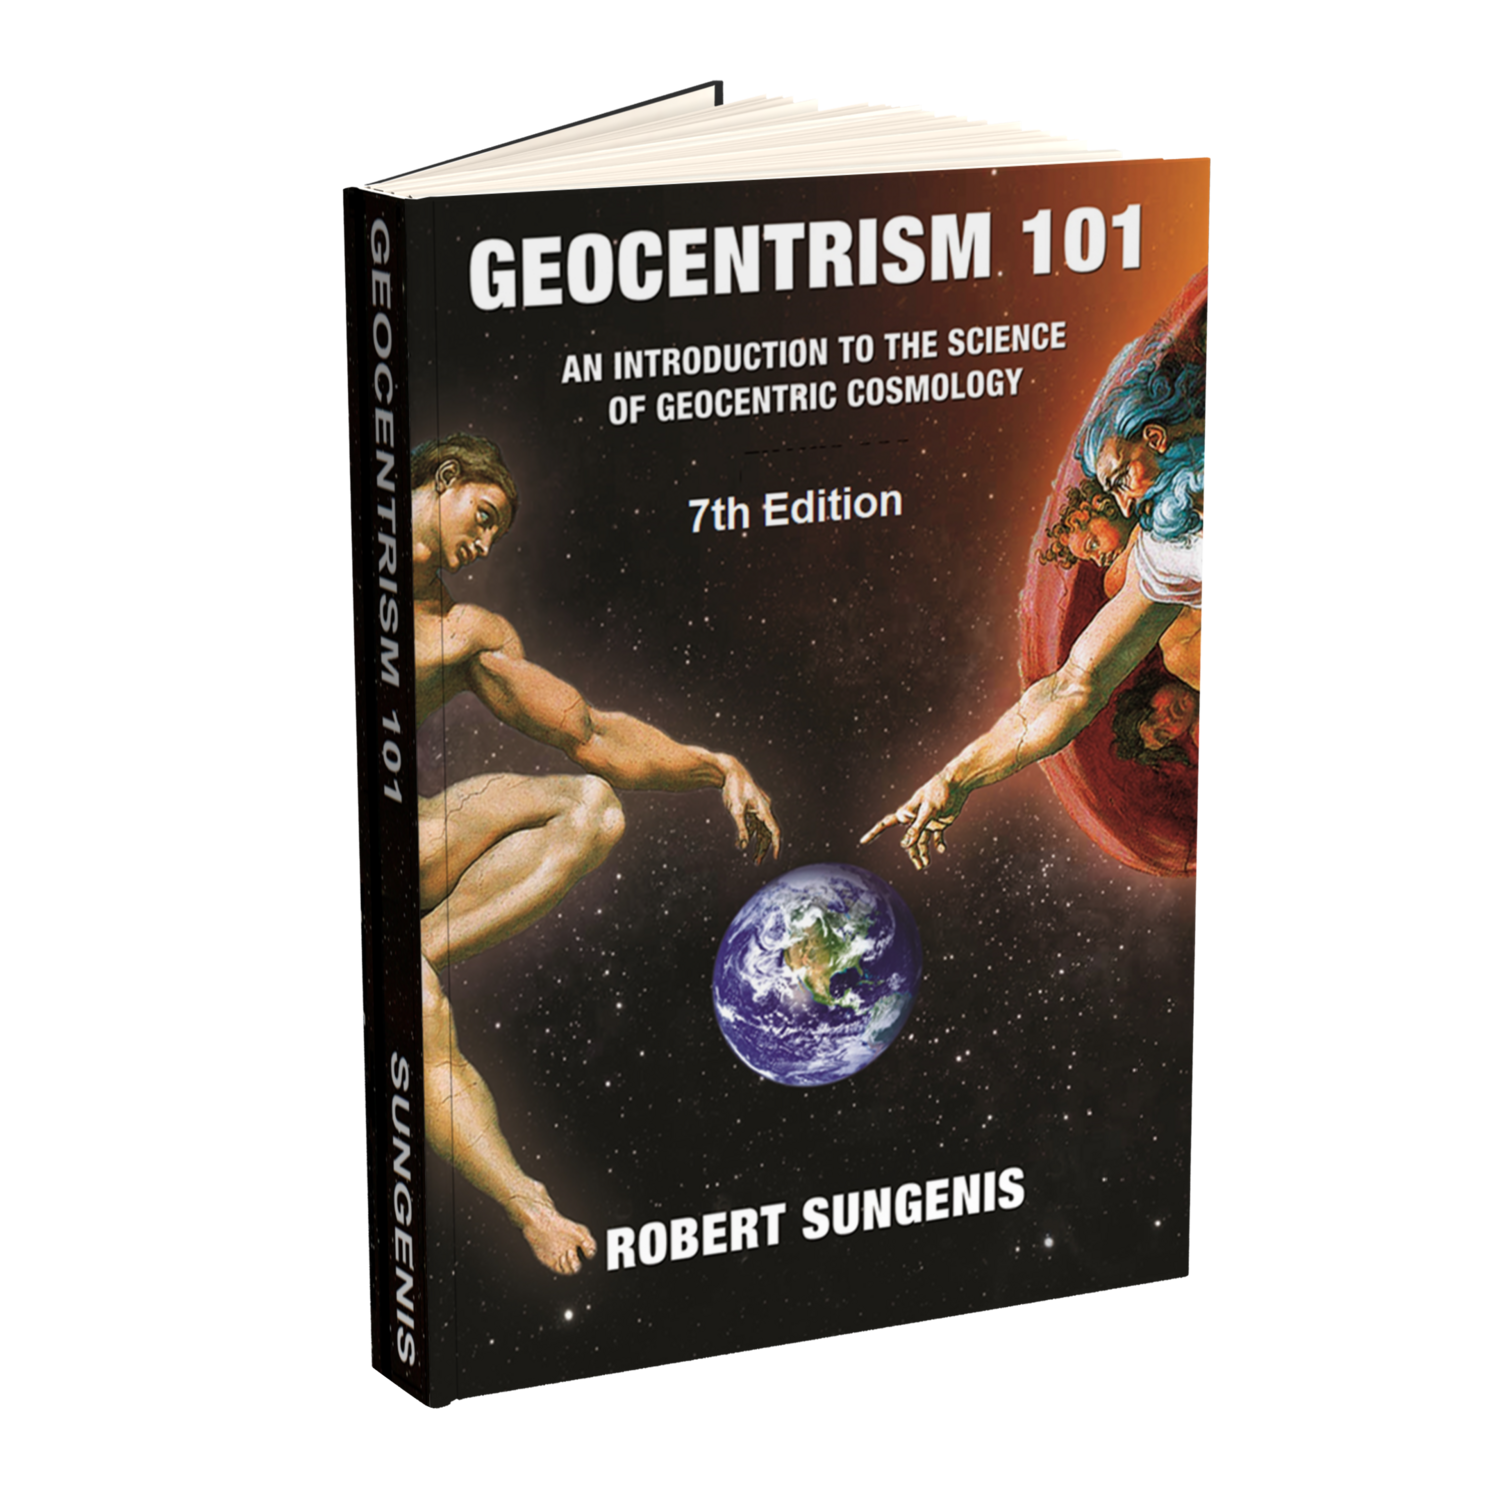 Geocentrism 101: An Introduction into the Science of Geocentric Cosmology - 7th Ed. (Paperback)